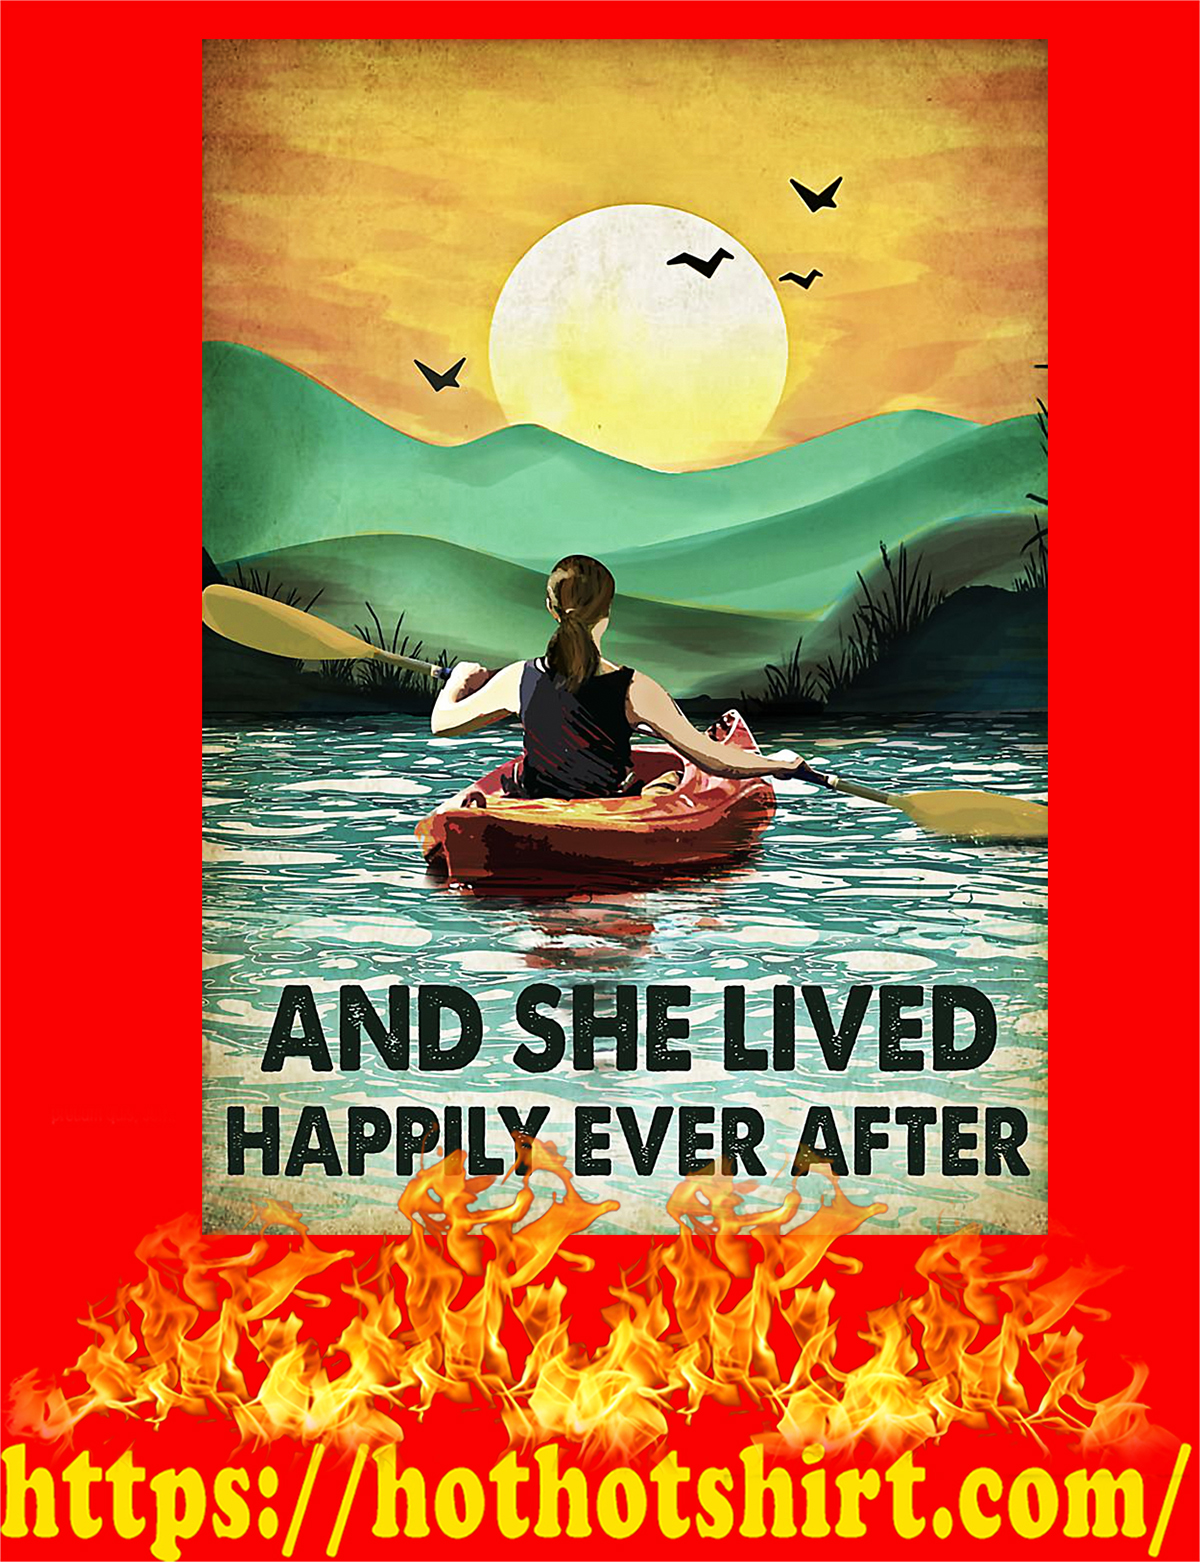 Rowing And she lived happily ever after poster